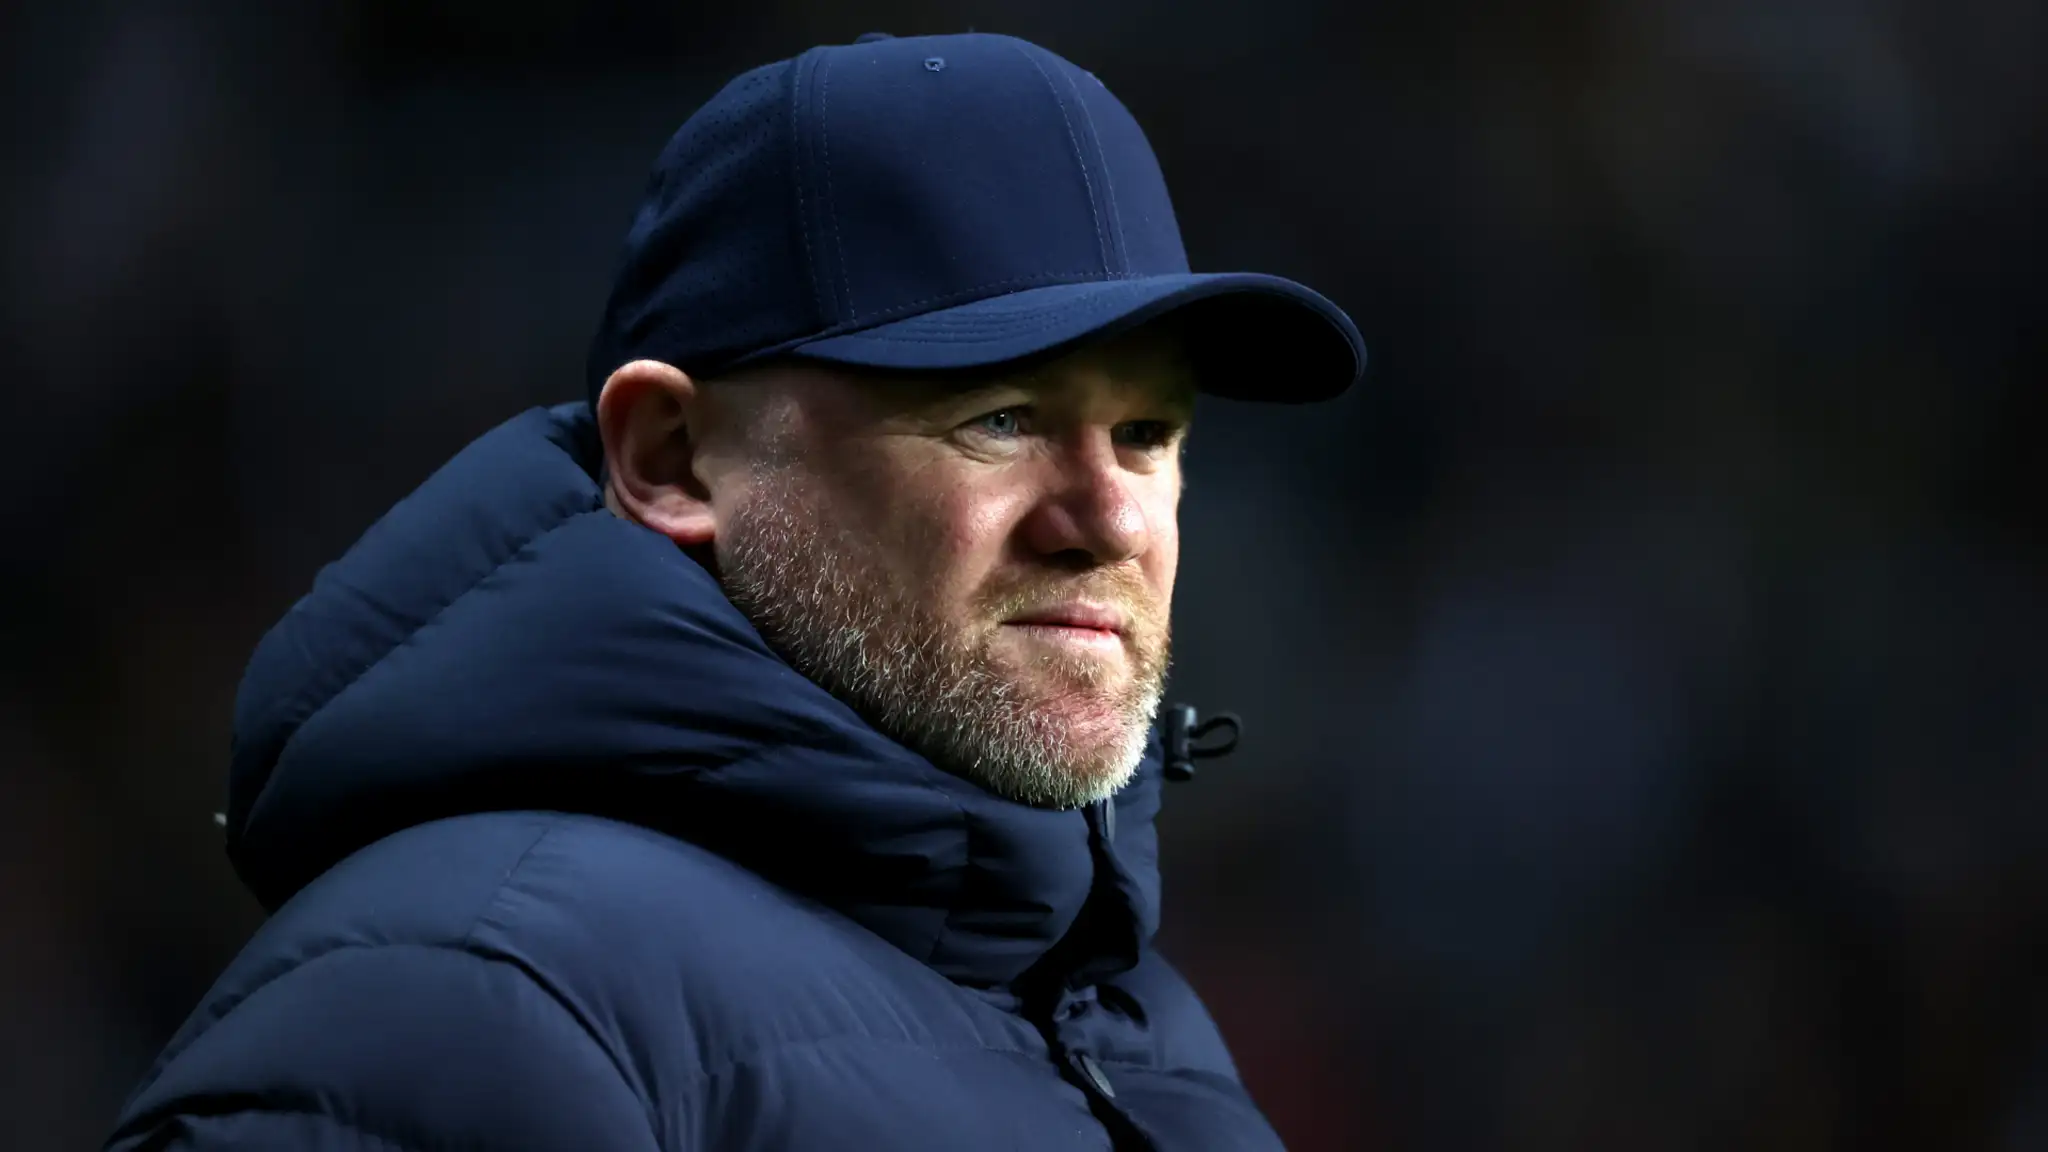 'Some of those players could play!' - Wayne Rooney accuses injured Manchester United players of ducking responsibility after disappointing Arsenal defeat